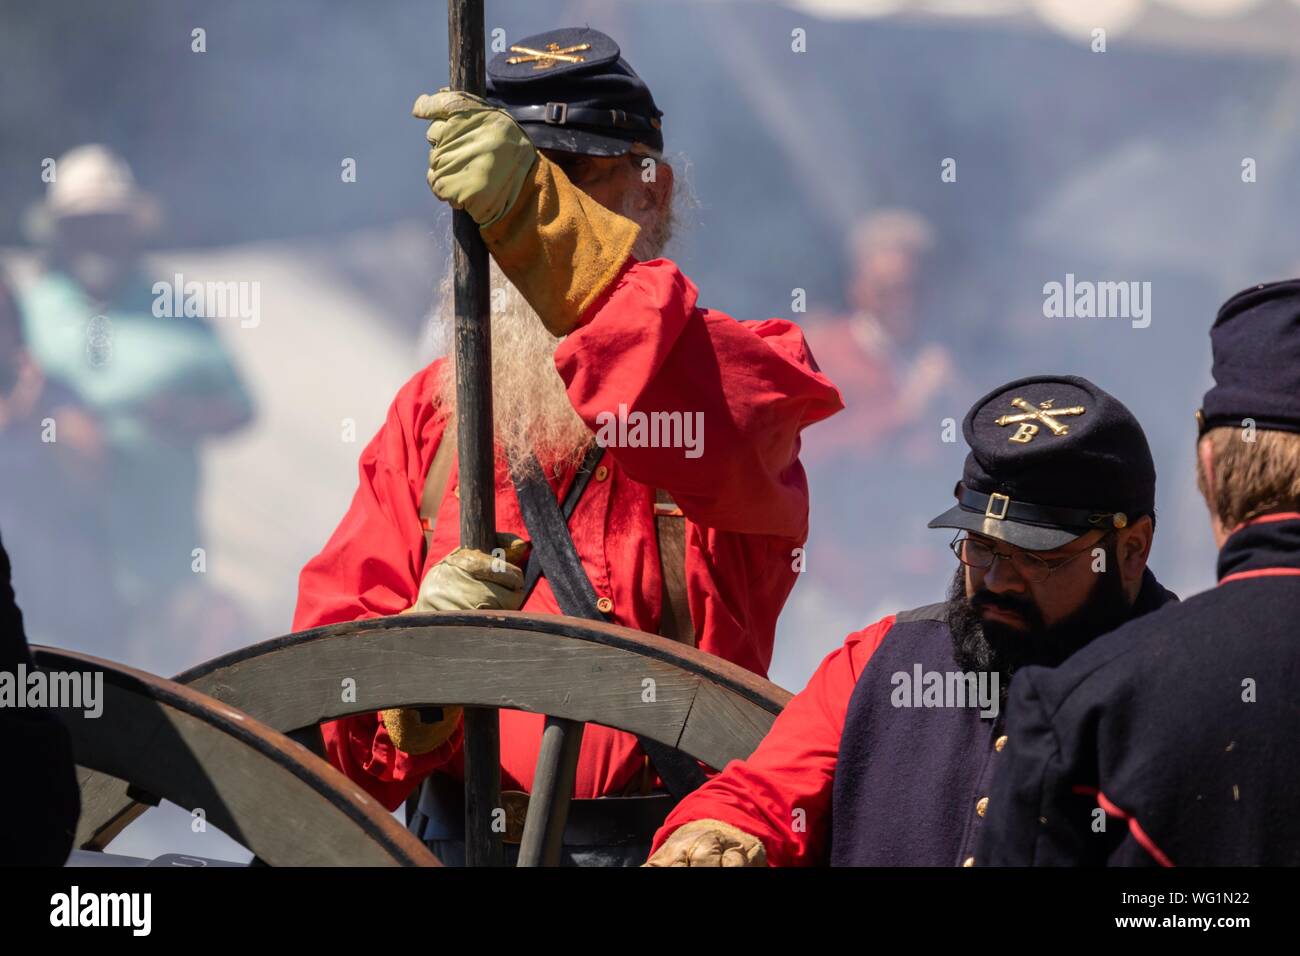 Man dressed in civil war era clothing by a canon during a Civil War reenactment Stock Photo